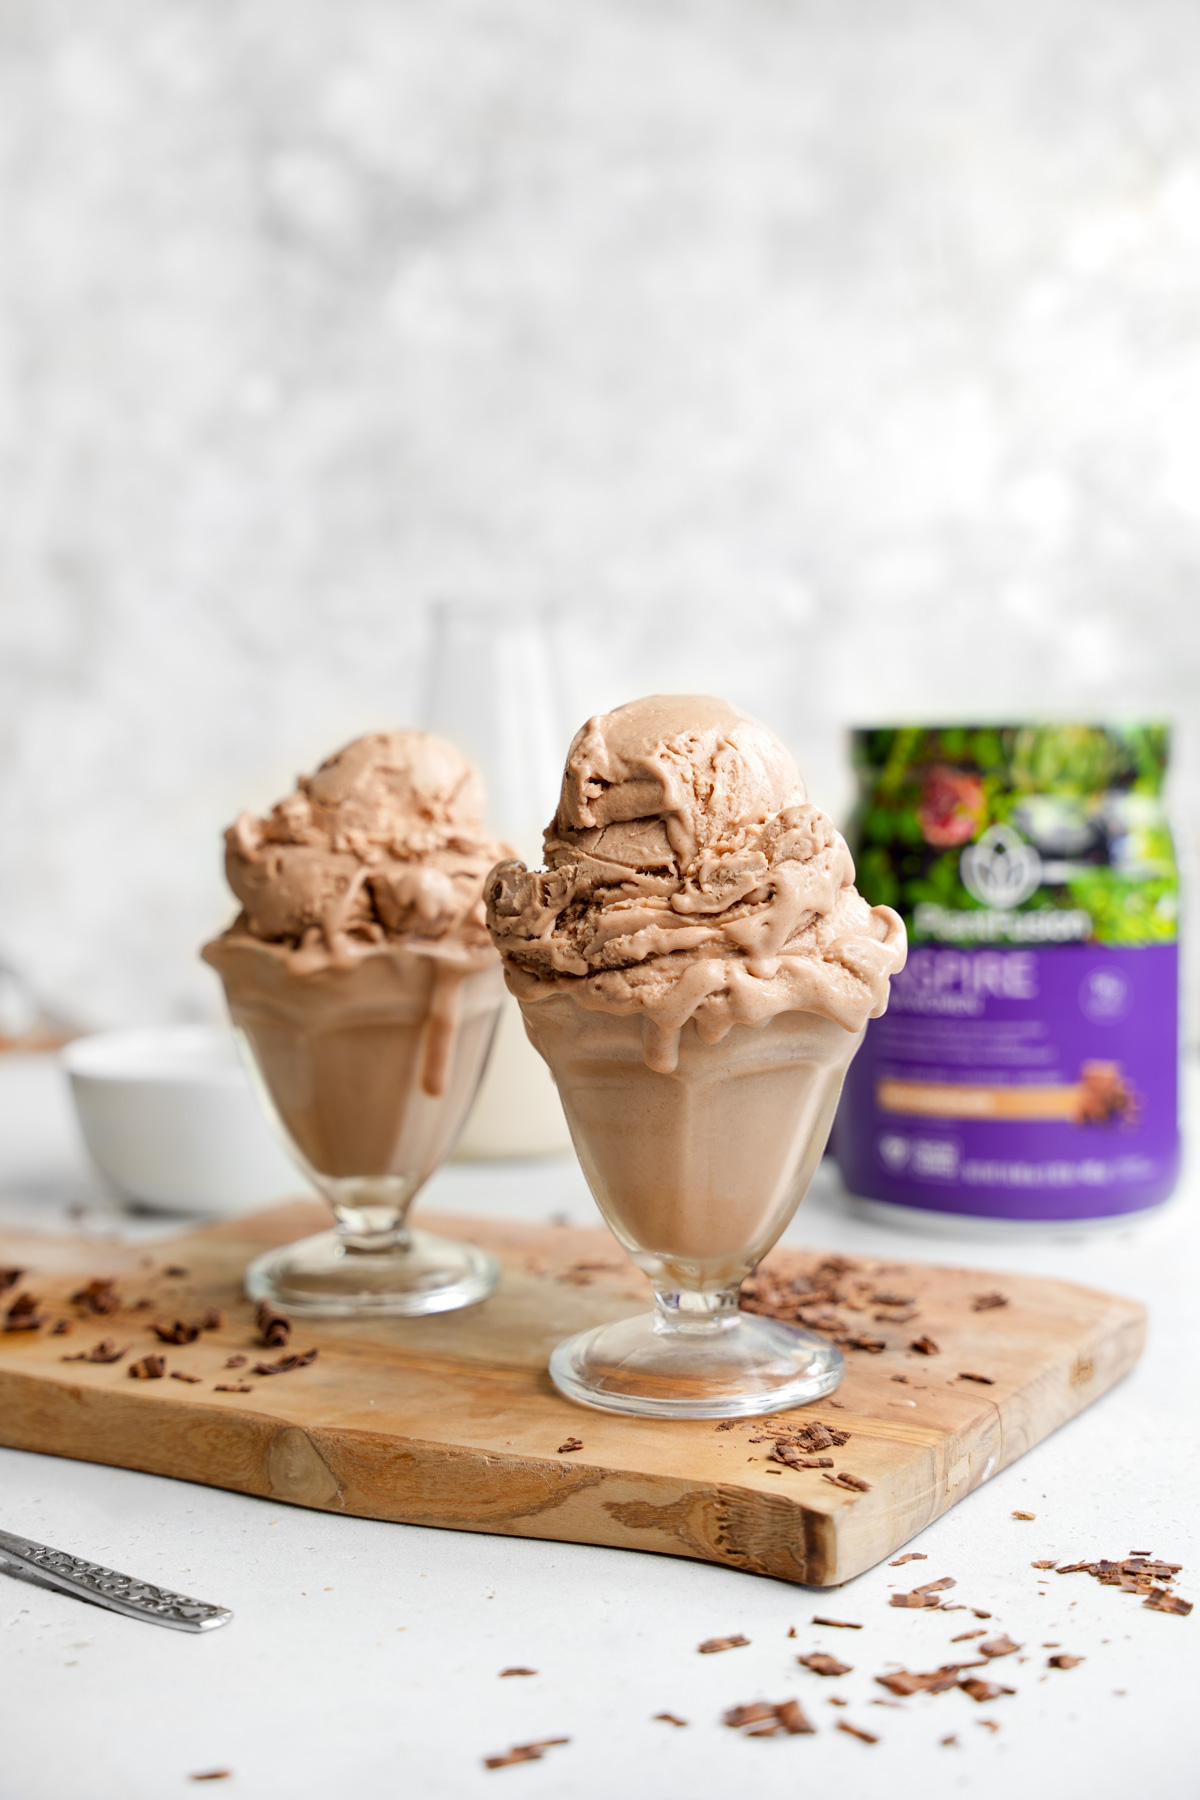 the vegan protein ice cream with the plantfusion protein powder